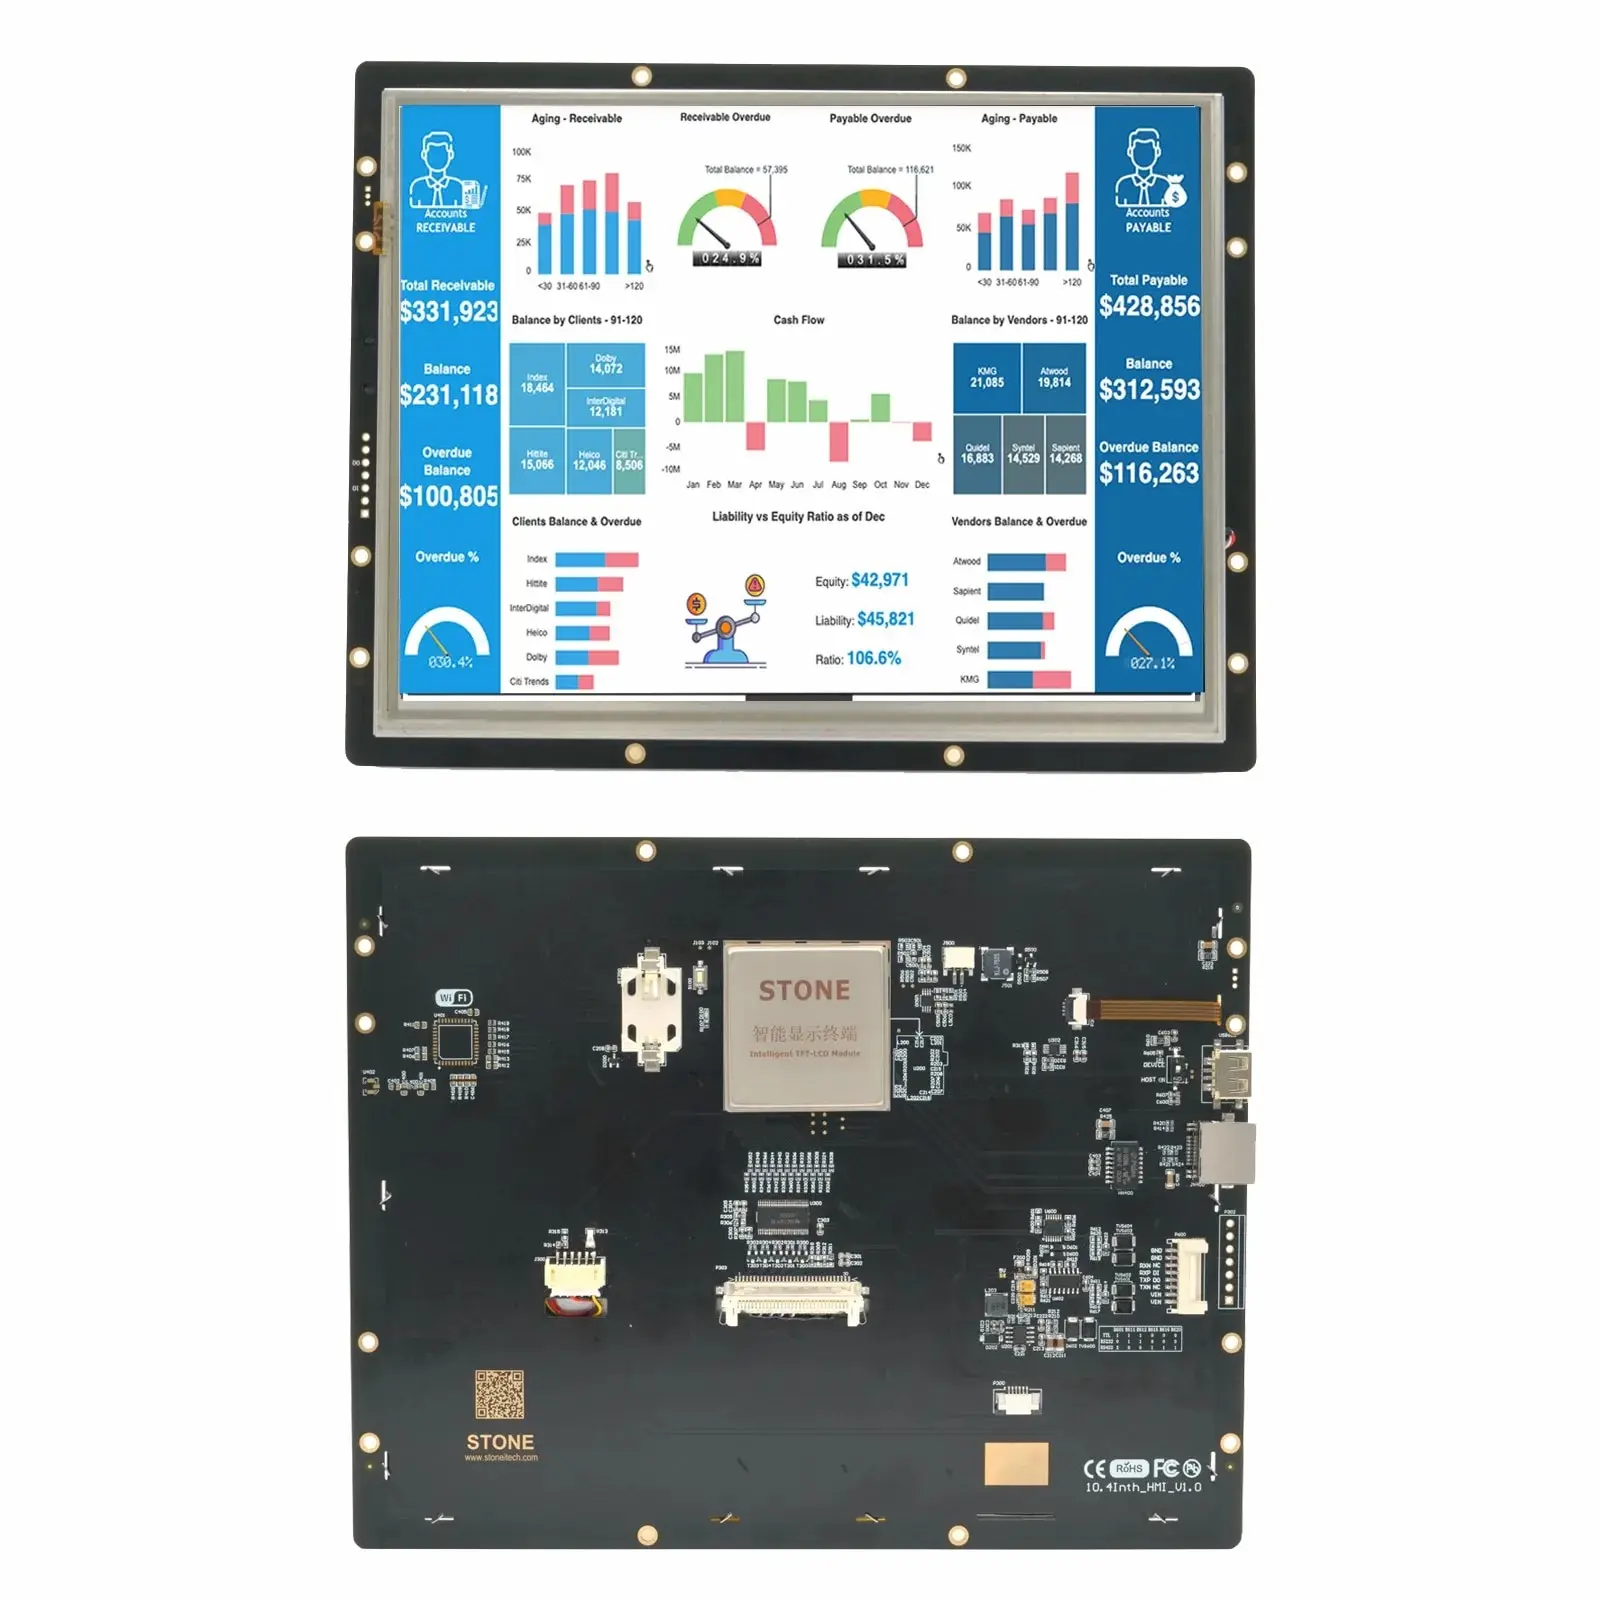 

10.4" SCBRHMI HMI Intelligent Smart UART Serial Touch TFT LCD Module Display Panel for Equipment Use